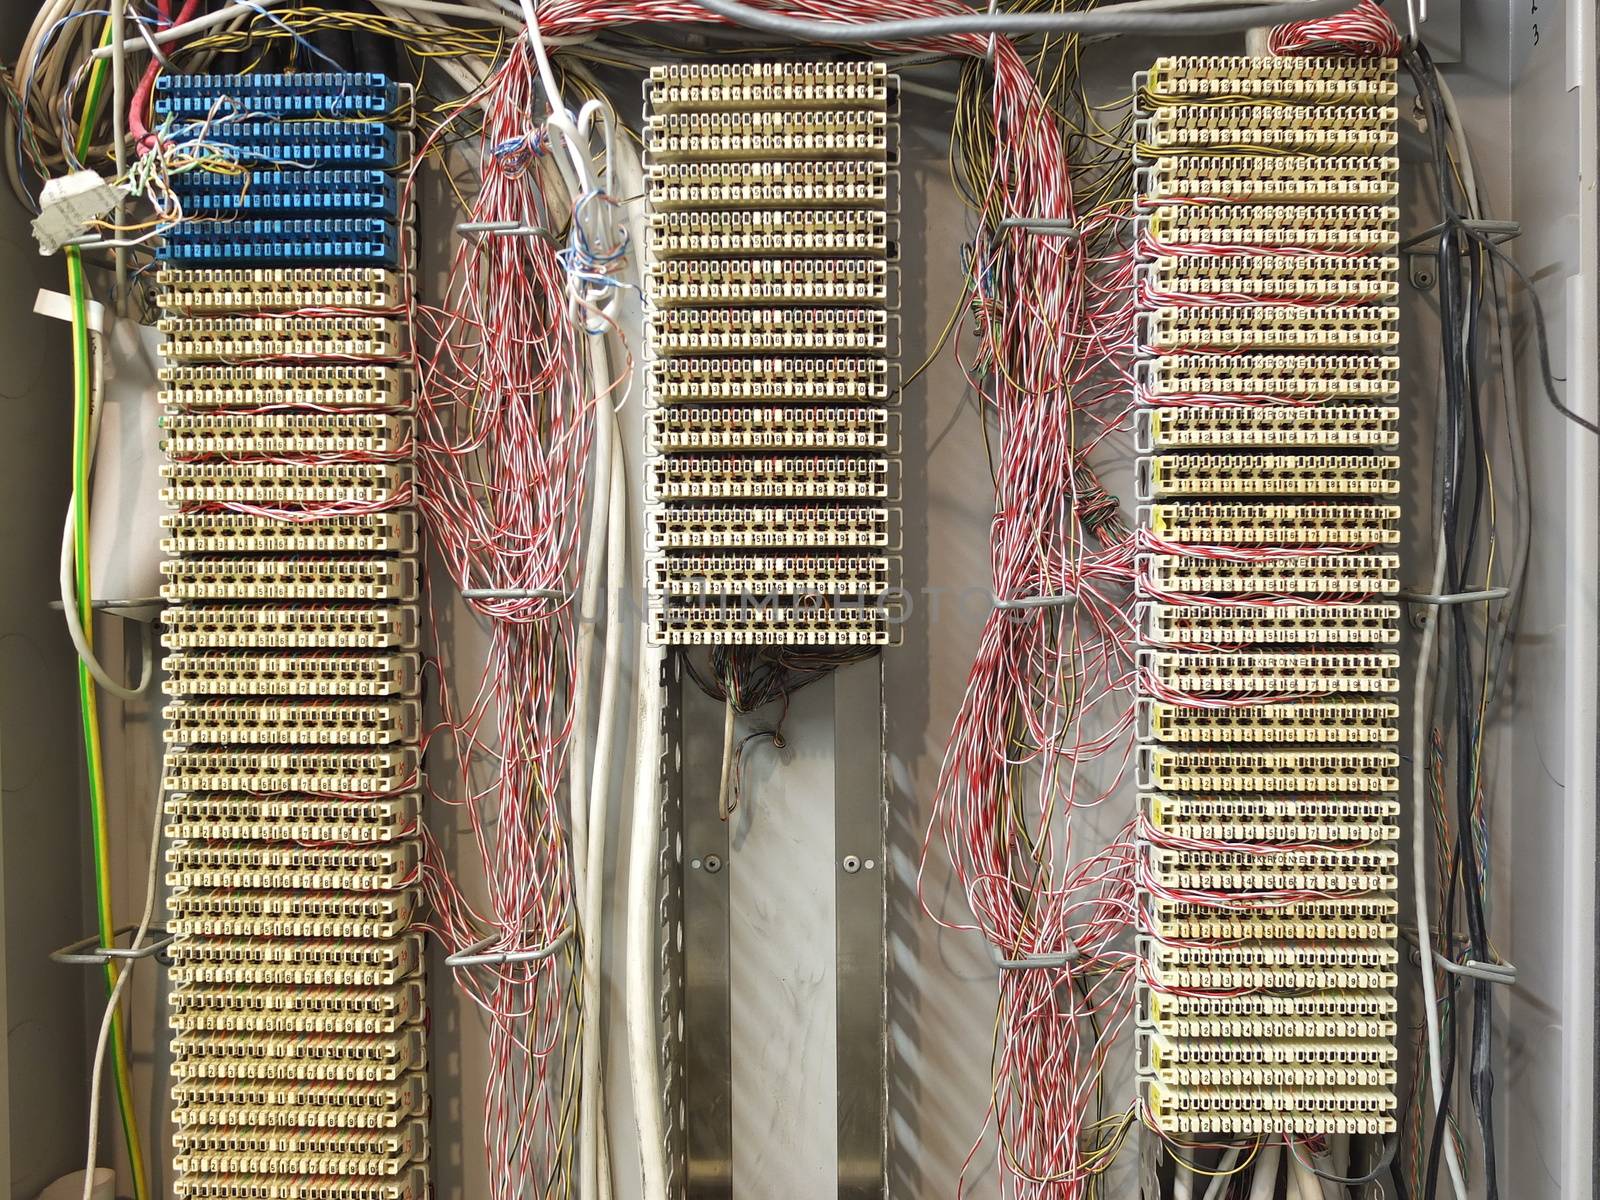 Phone junction box, switchboard with lots of cables